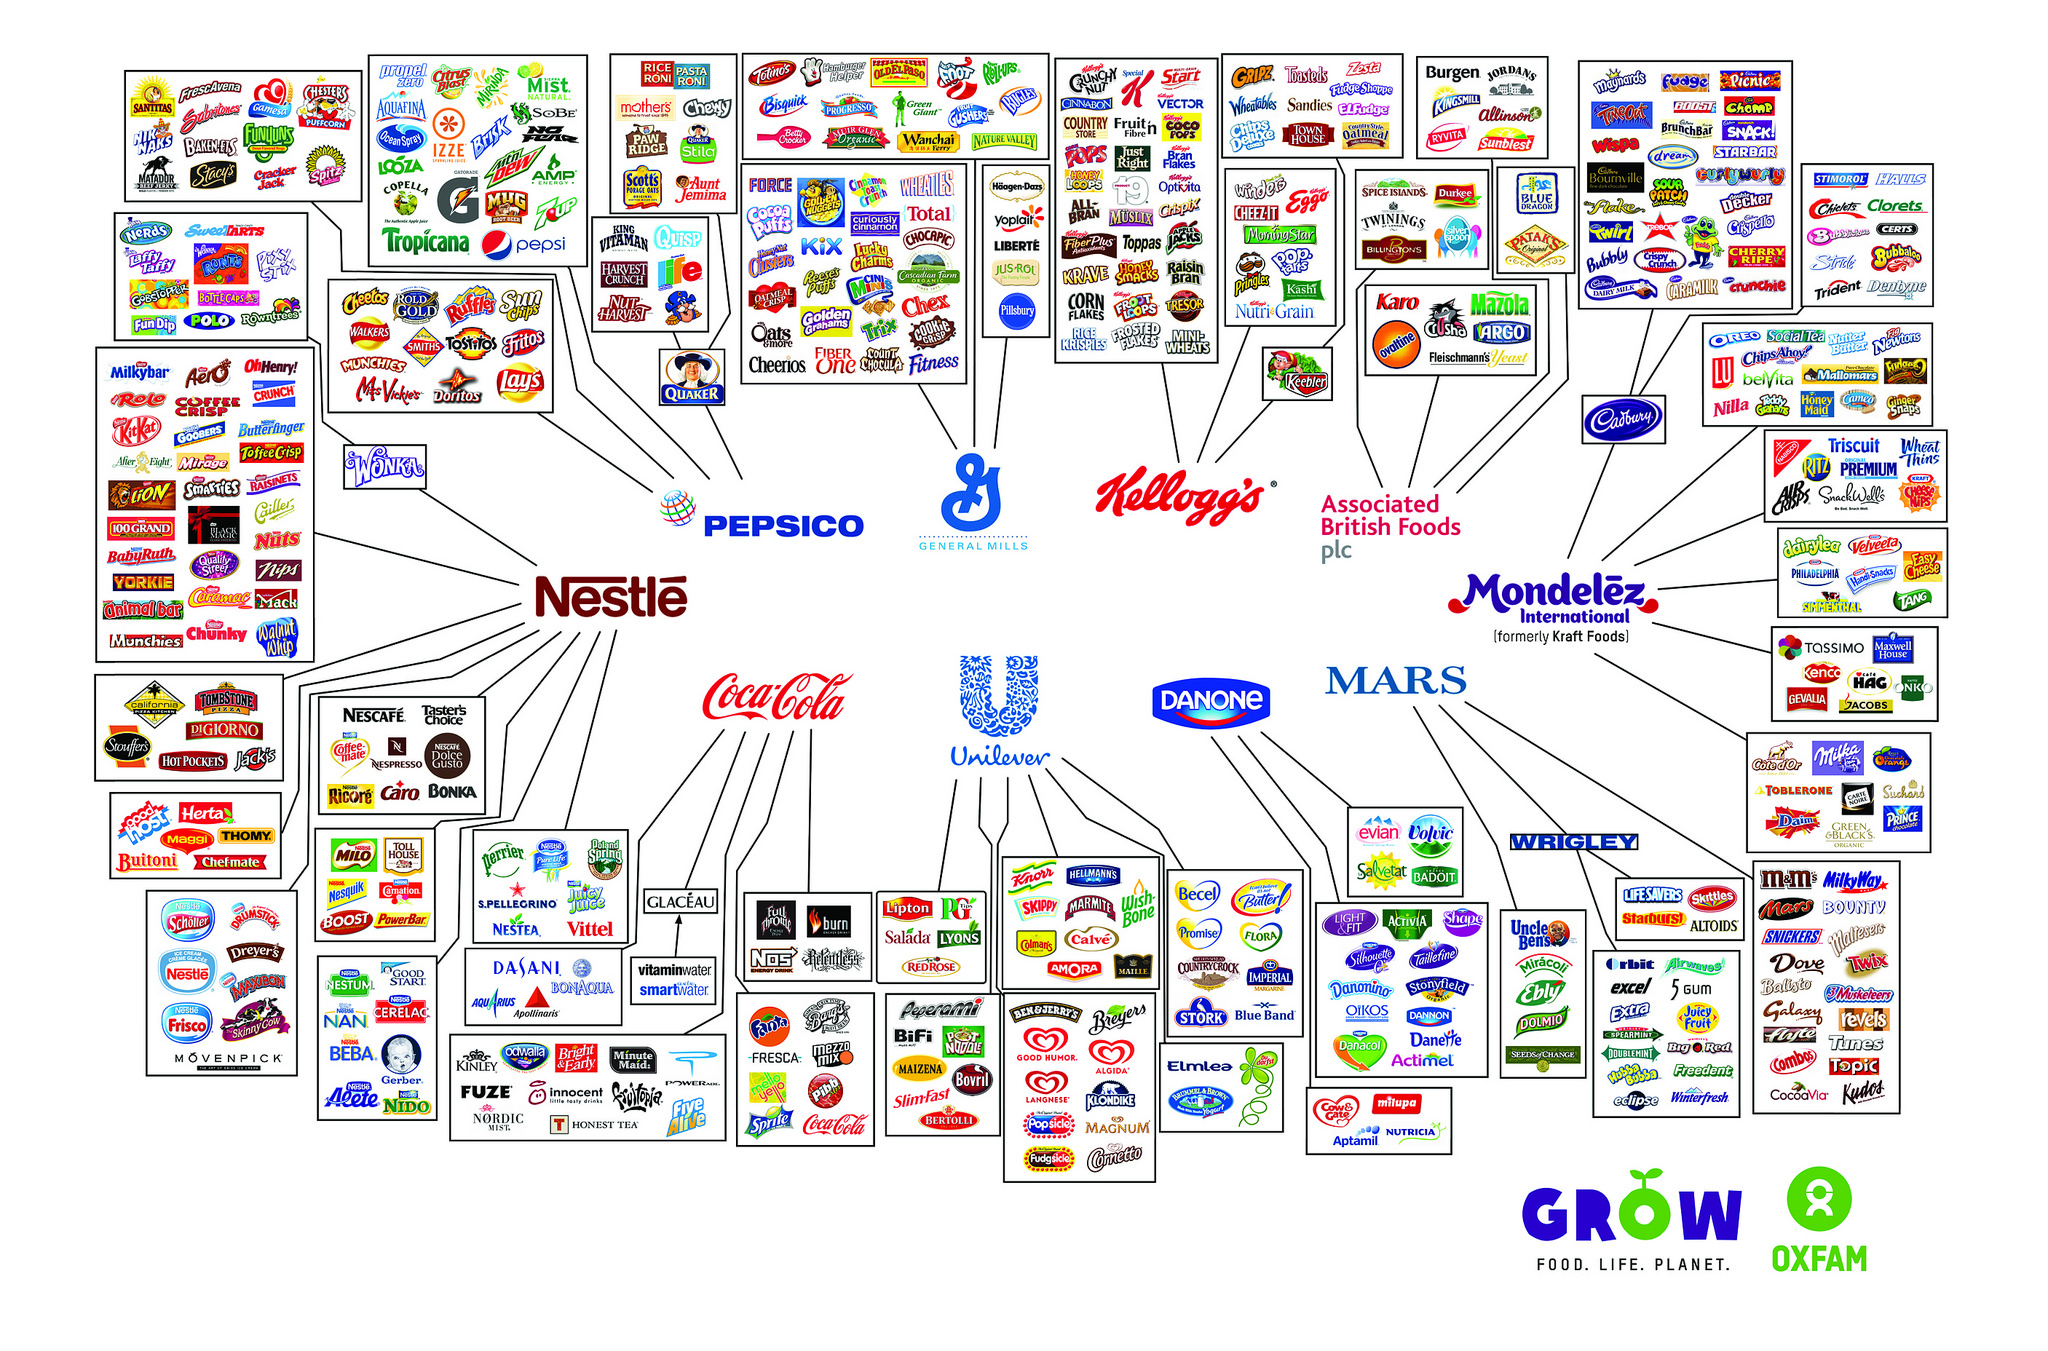 Behind-the-brands-illusion-of-choice-graphic-2048x1351.jpg